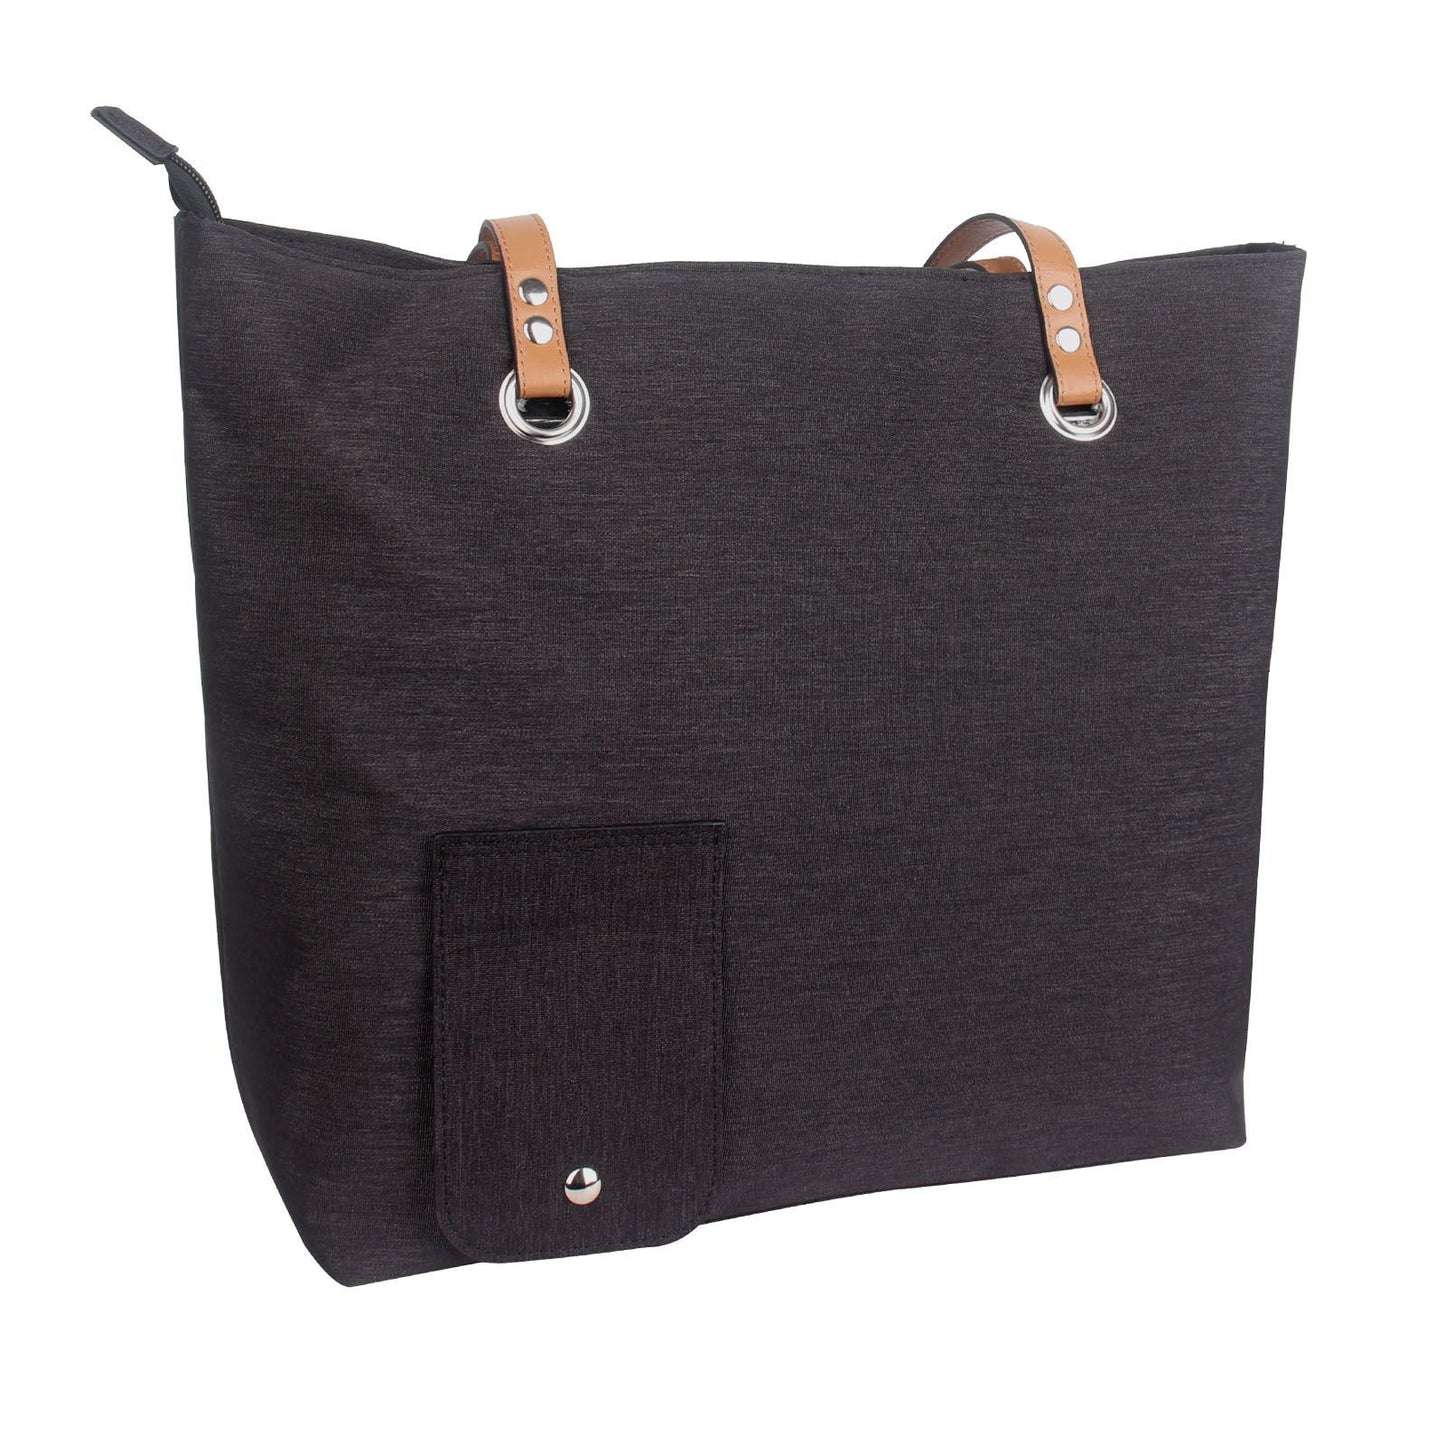 "Insulated Portable Red Wine Bag - Perfect for Picnics, Beach, and On-the-Go!"